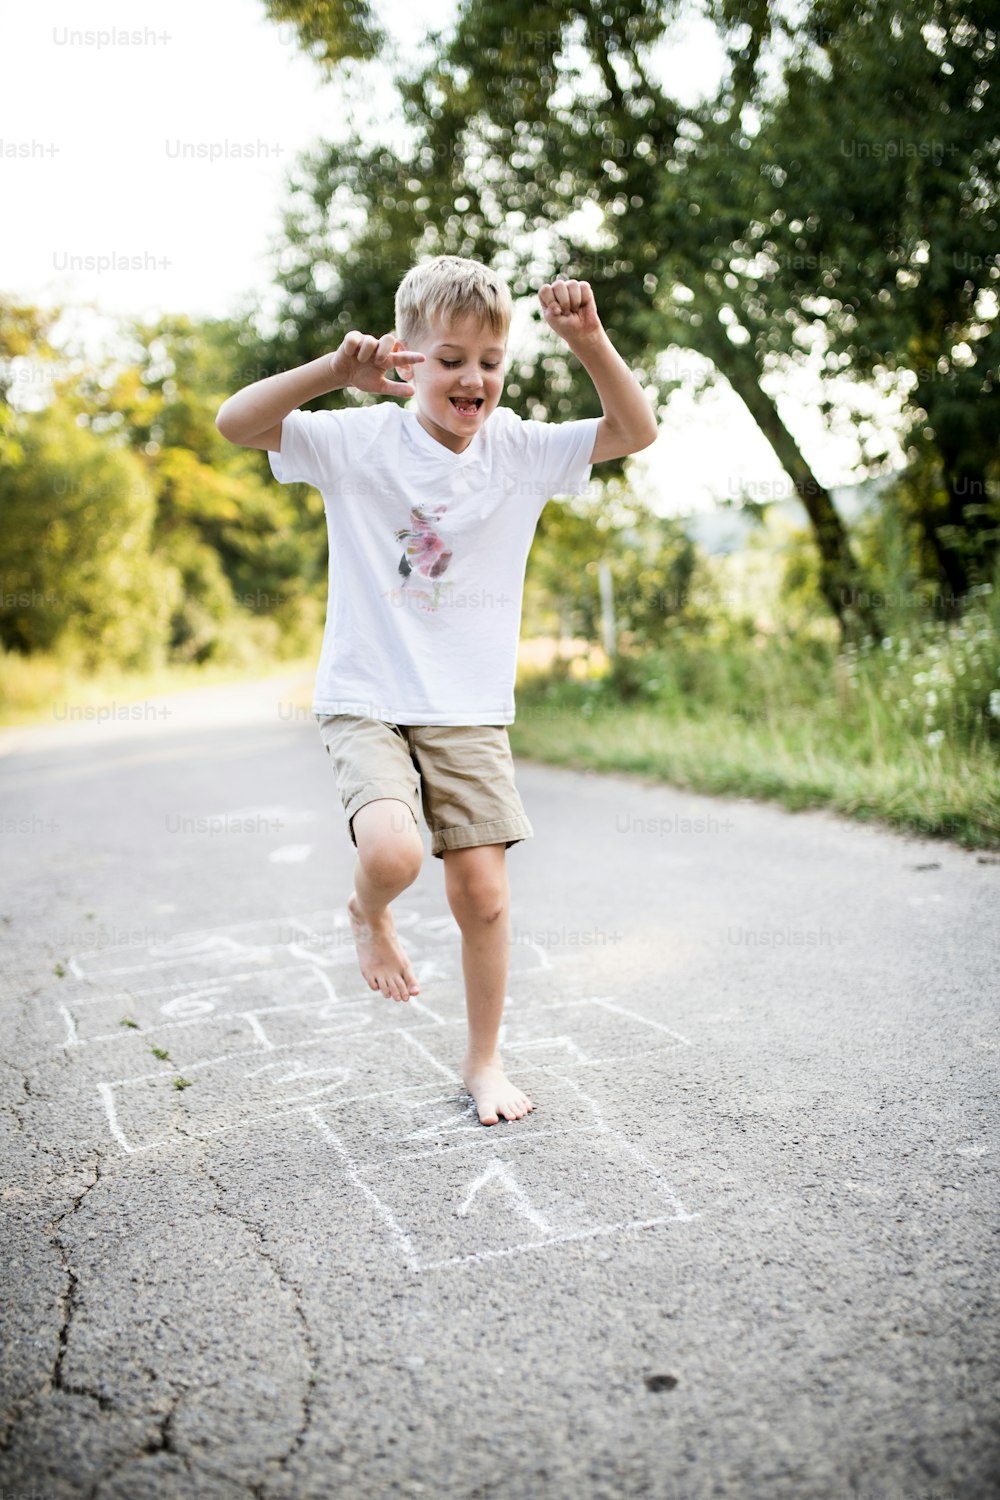 A barefoot cheerful small boy hopscotching on a road in park on a summer day.